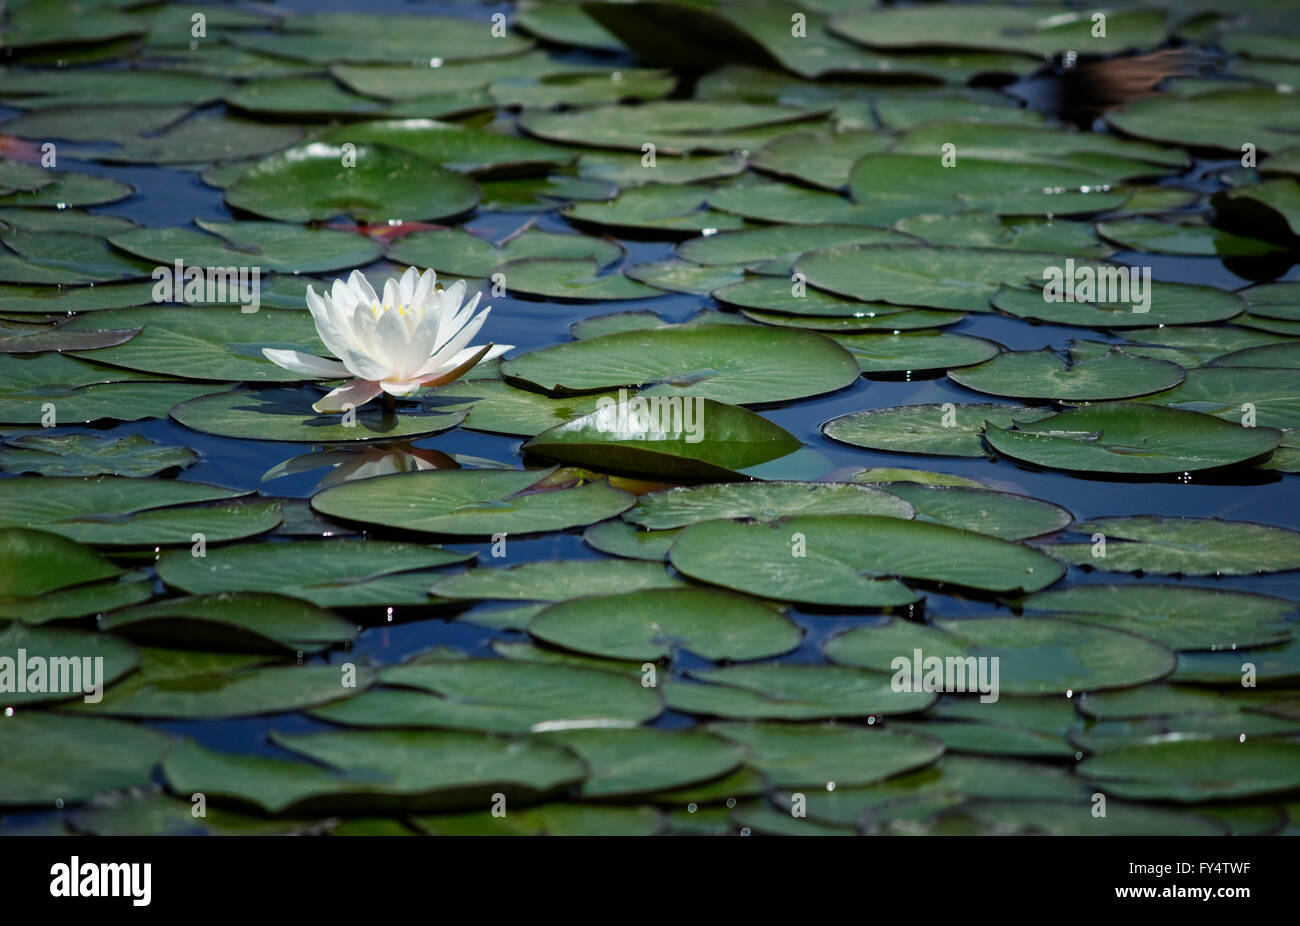 Beautiful sacred white water lily (waterlily), a rhizomatous aquatic herb, surrounded by floating lily pads. Greece Stock Photo